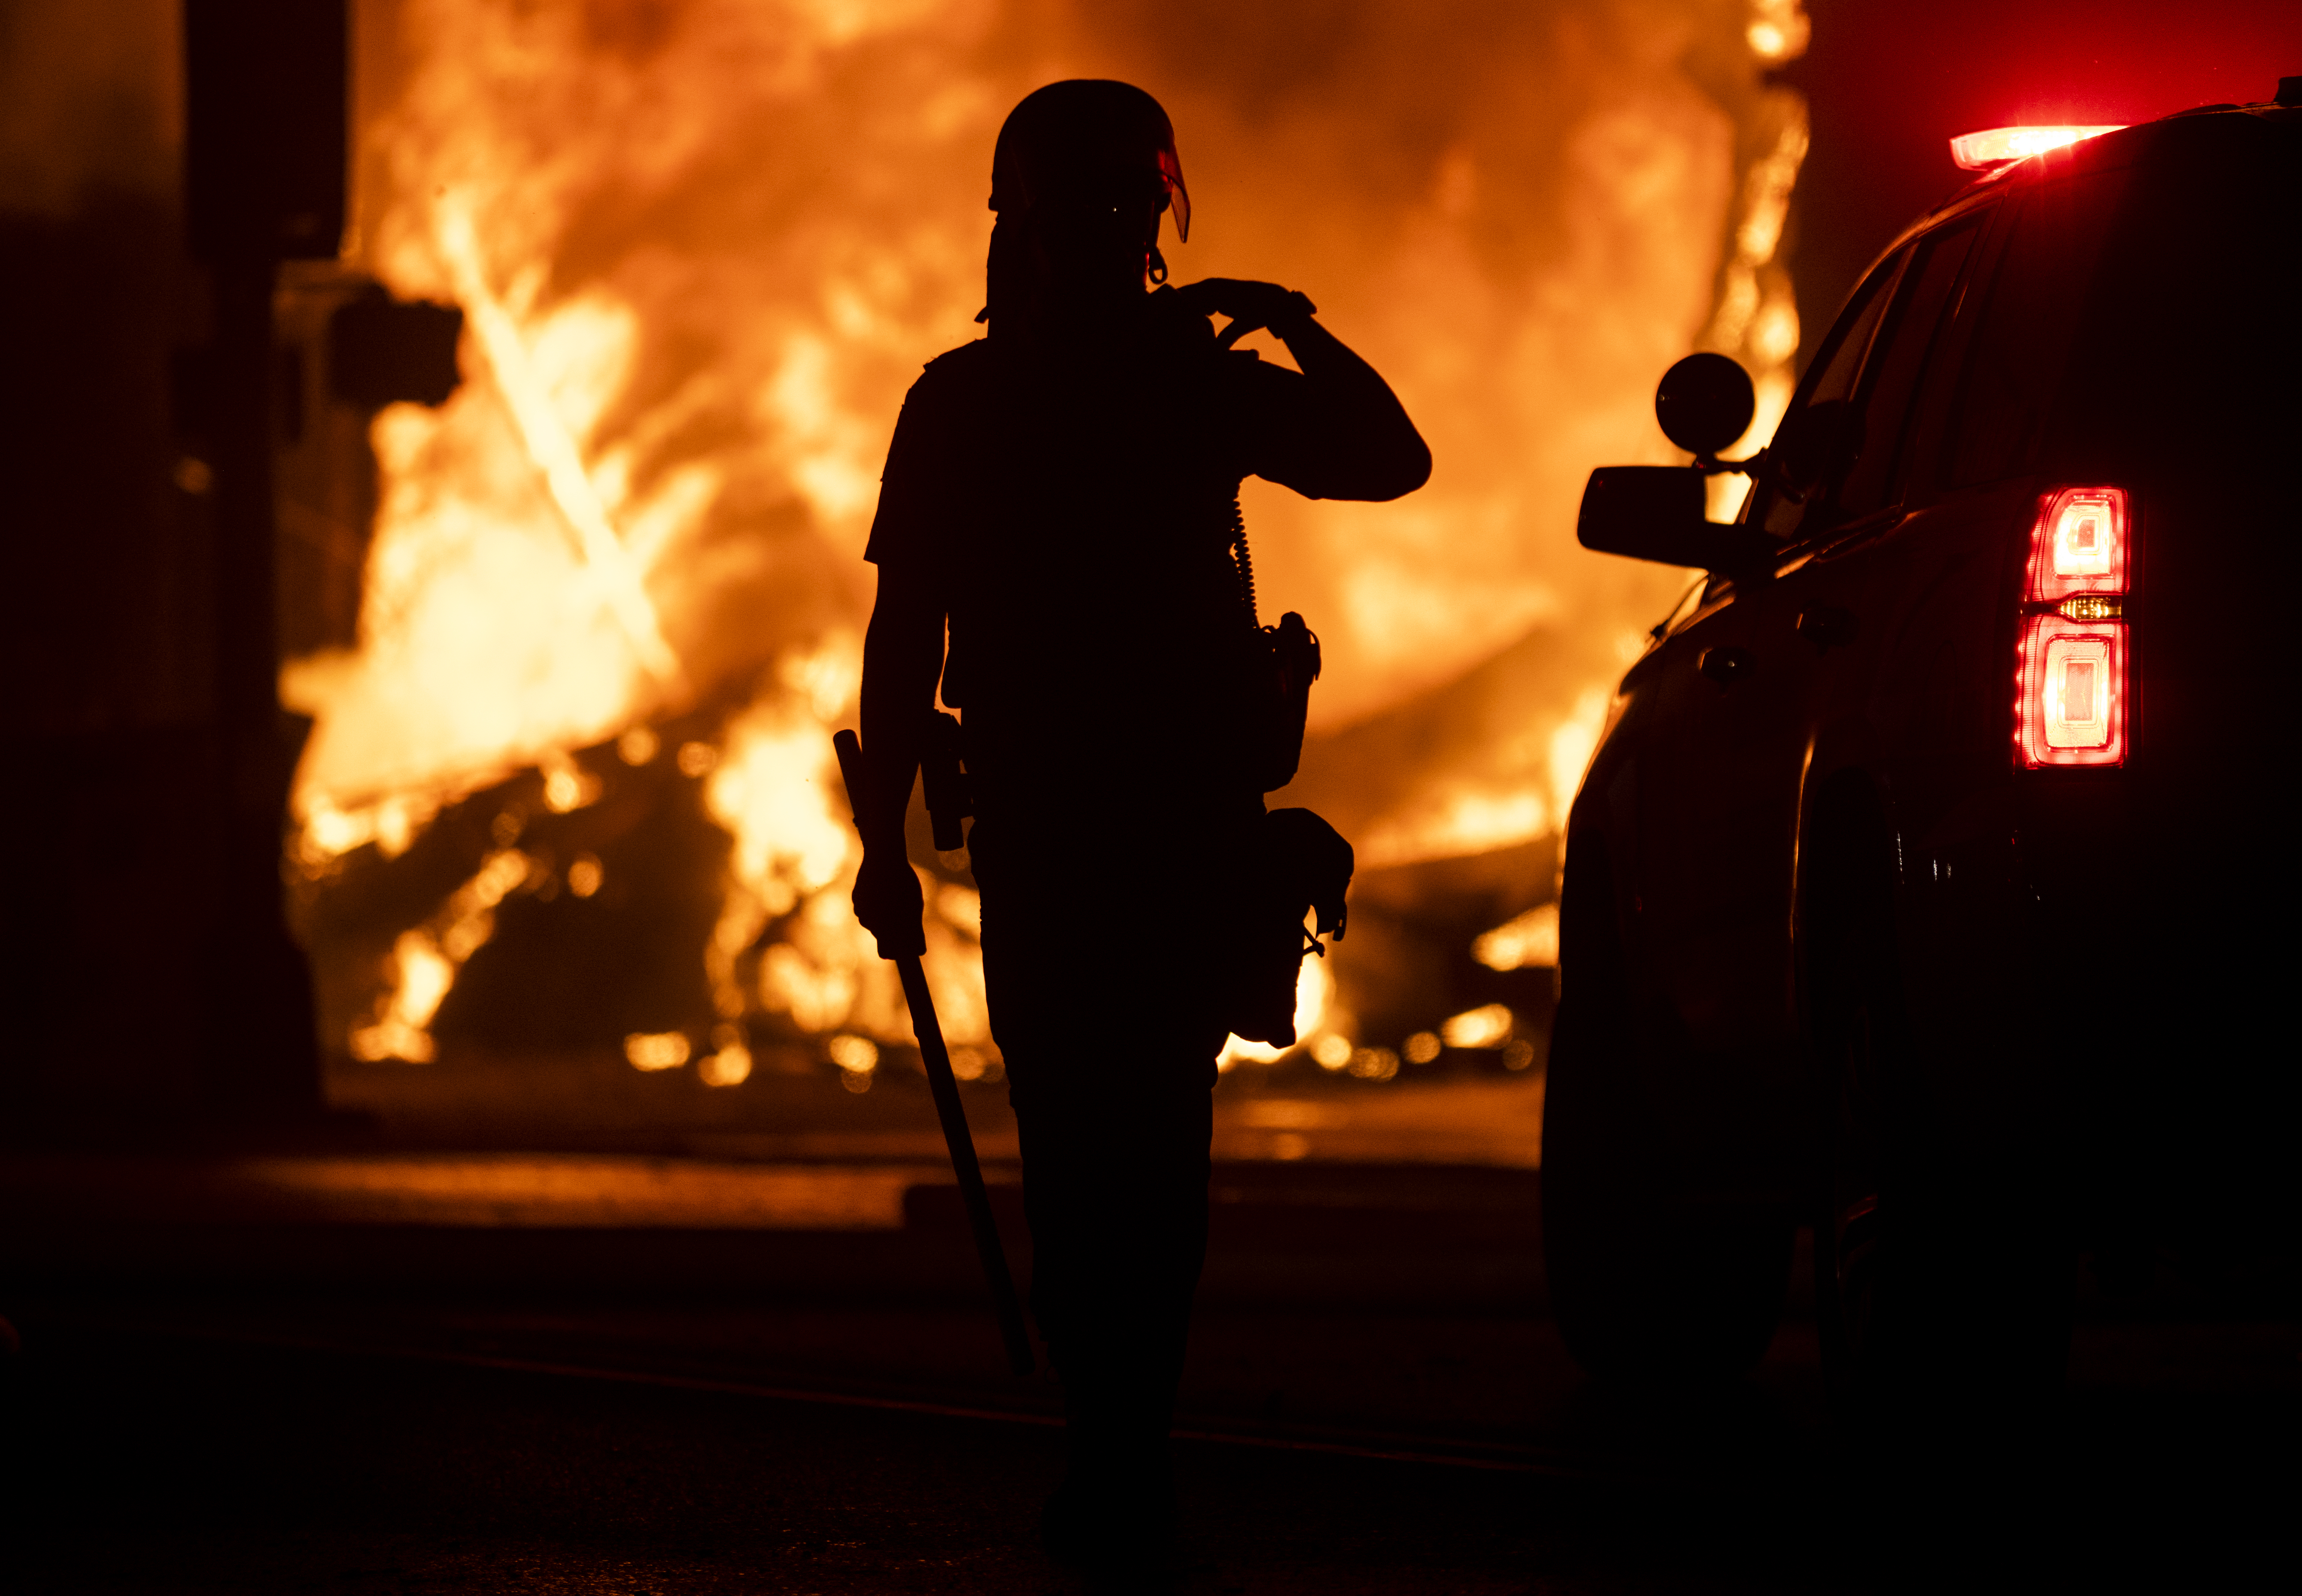 A police officer stands watch as a looted pawn shop burns behind them on May 28, 2020 in Minneapolis, Minnesota. (Photo by Stephen Maturen/Getty Images)